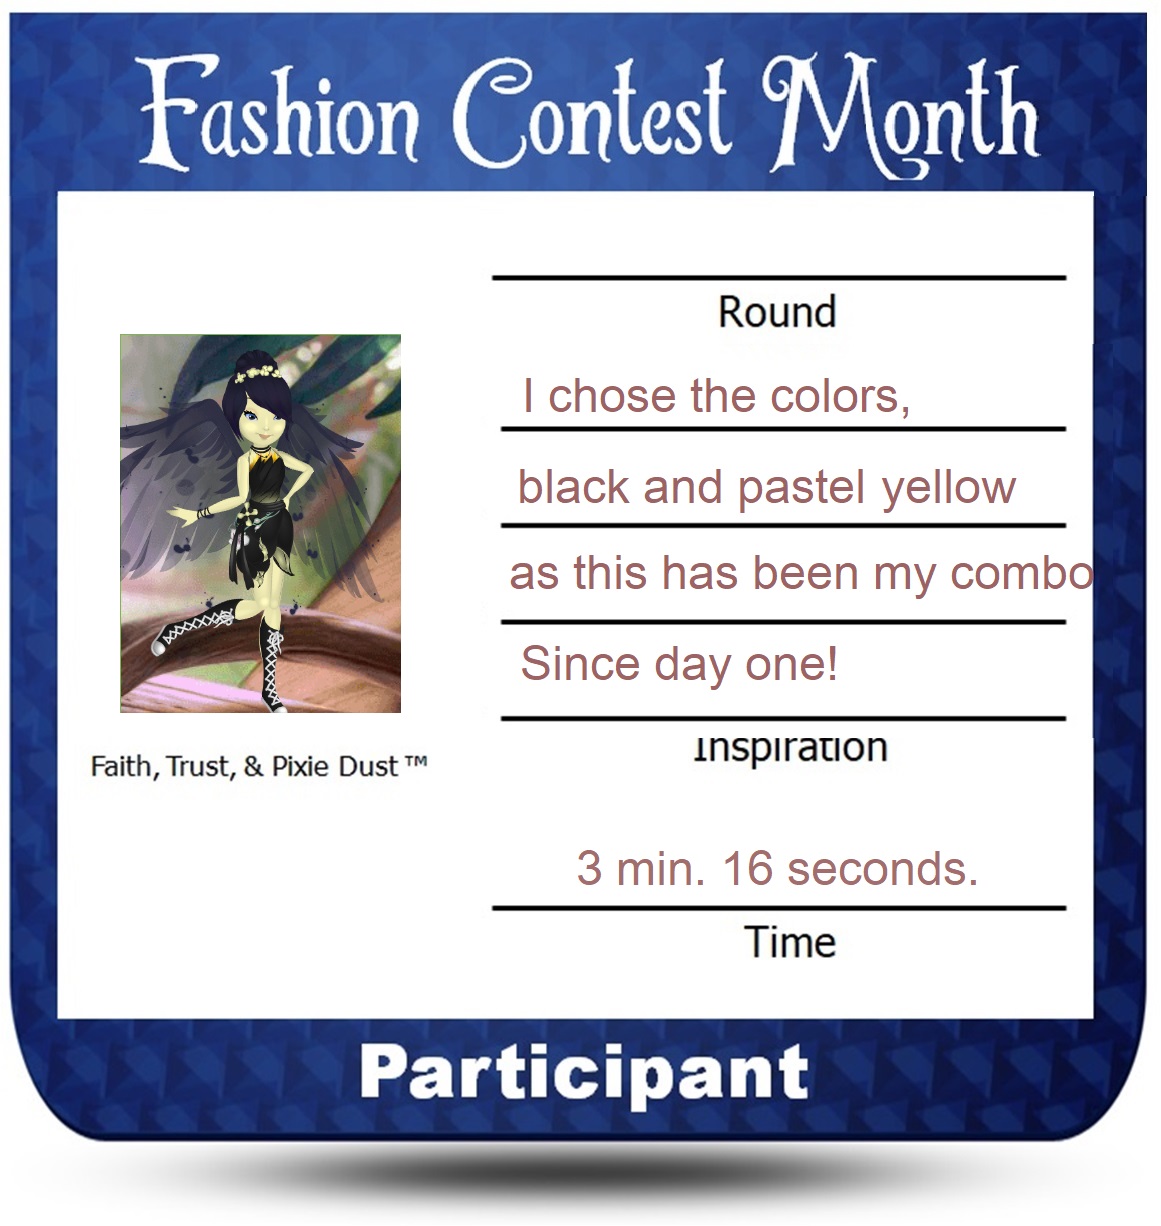 Participant Entry Template R4.jpg